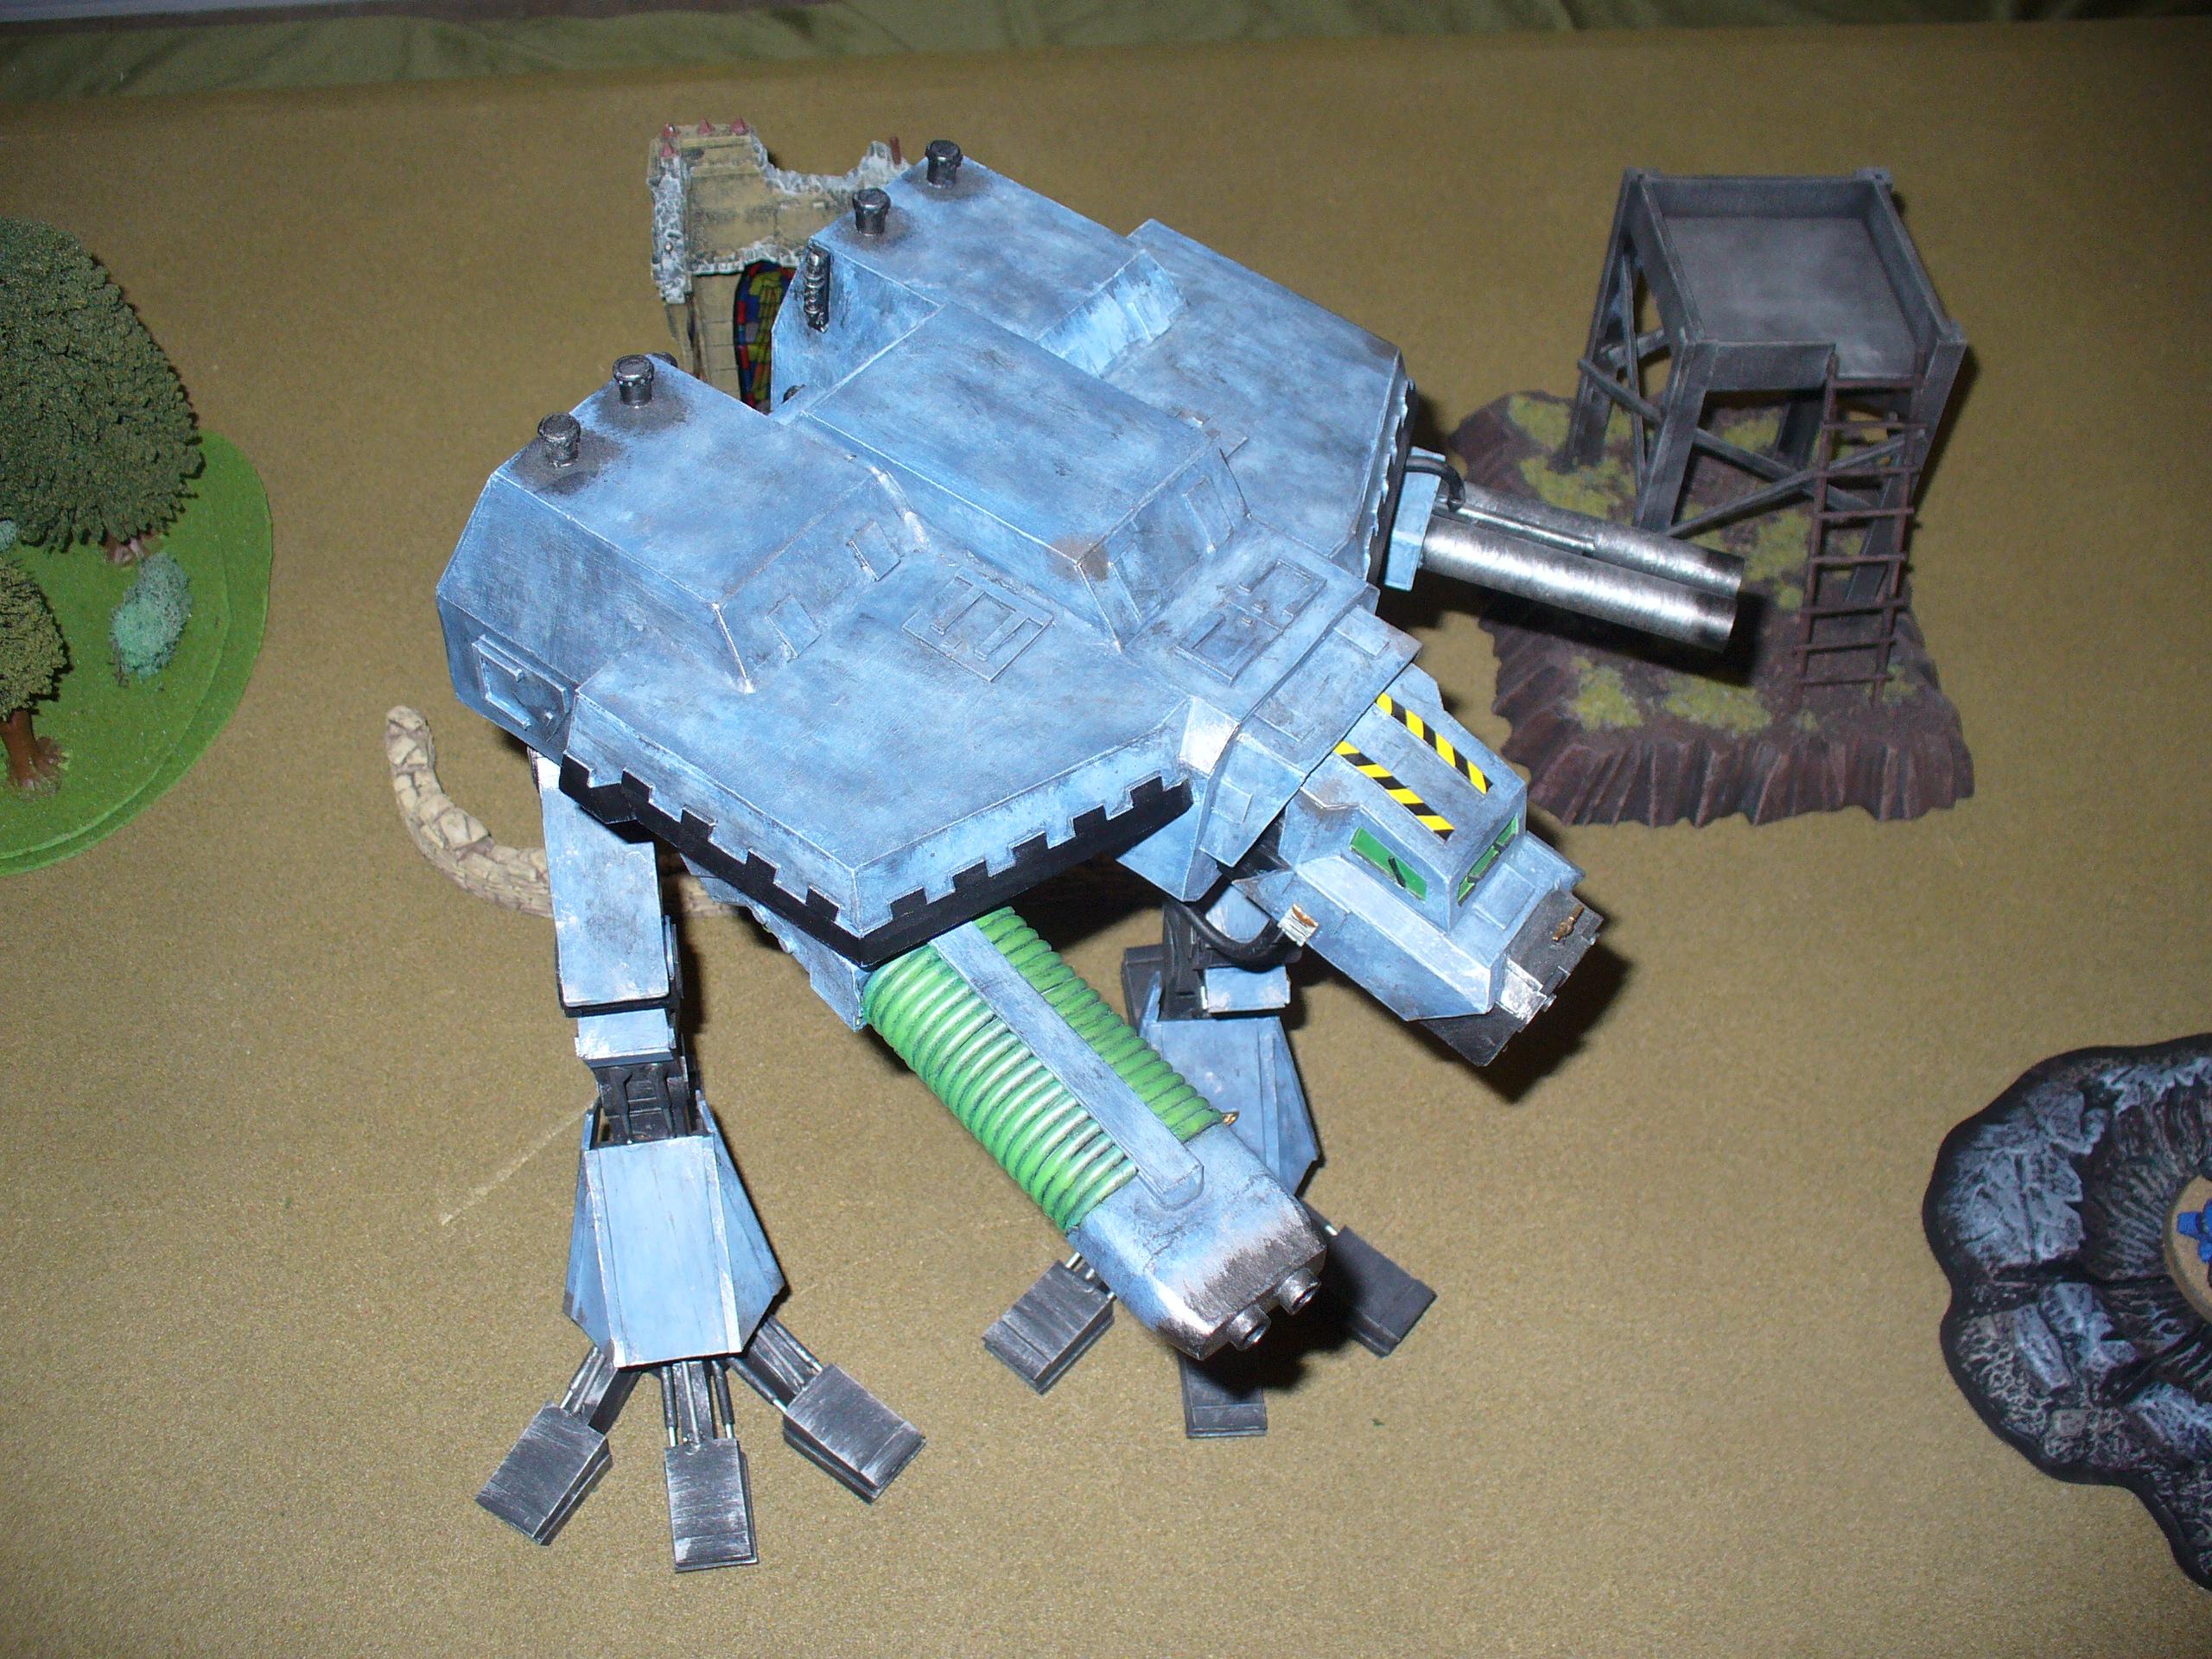 Overhead view, you can see the weapons a bit more here, a Plasma Blaster and Turbo Laser Destructor